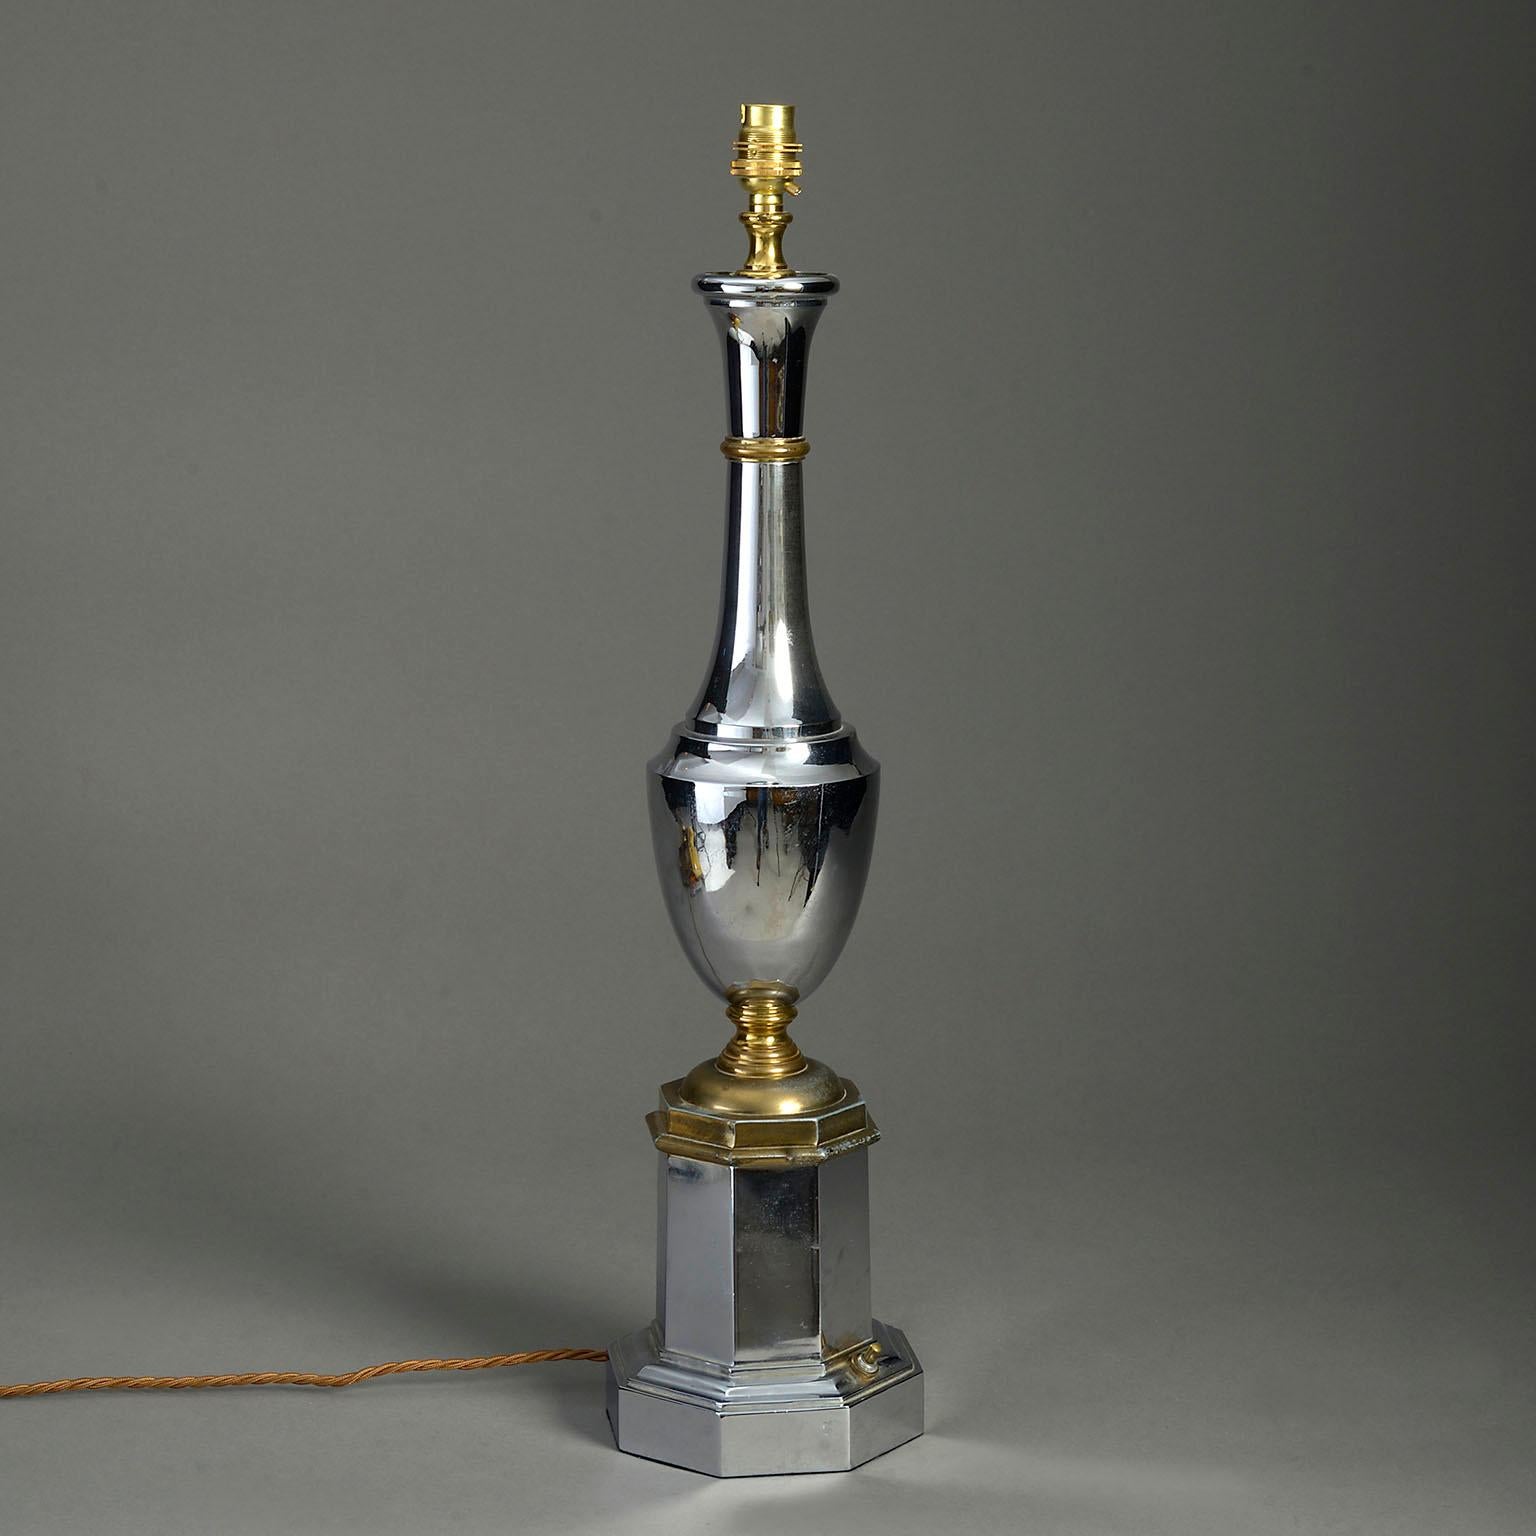 A mid-twentieth century polished chrome and brass table lamp in the Empire manner, the turned column stem set upon an octagonal plinth.

Dimensions refer to original chrome and brass parts only.

This lamp can be rewired inclusive to all